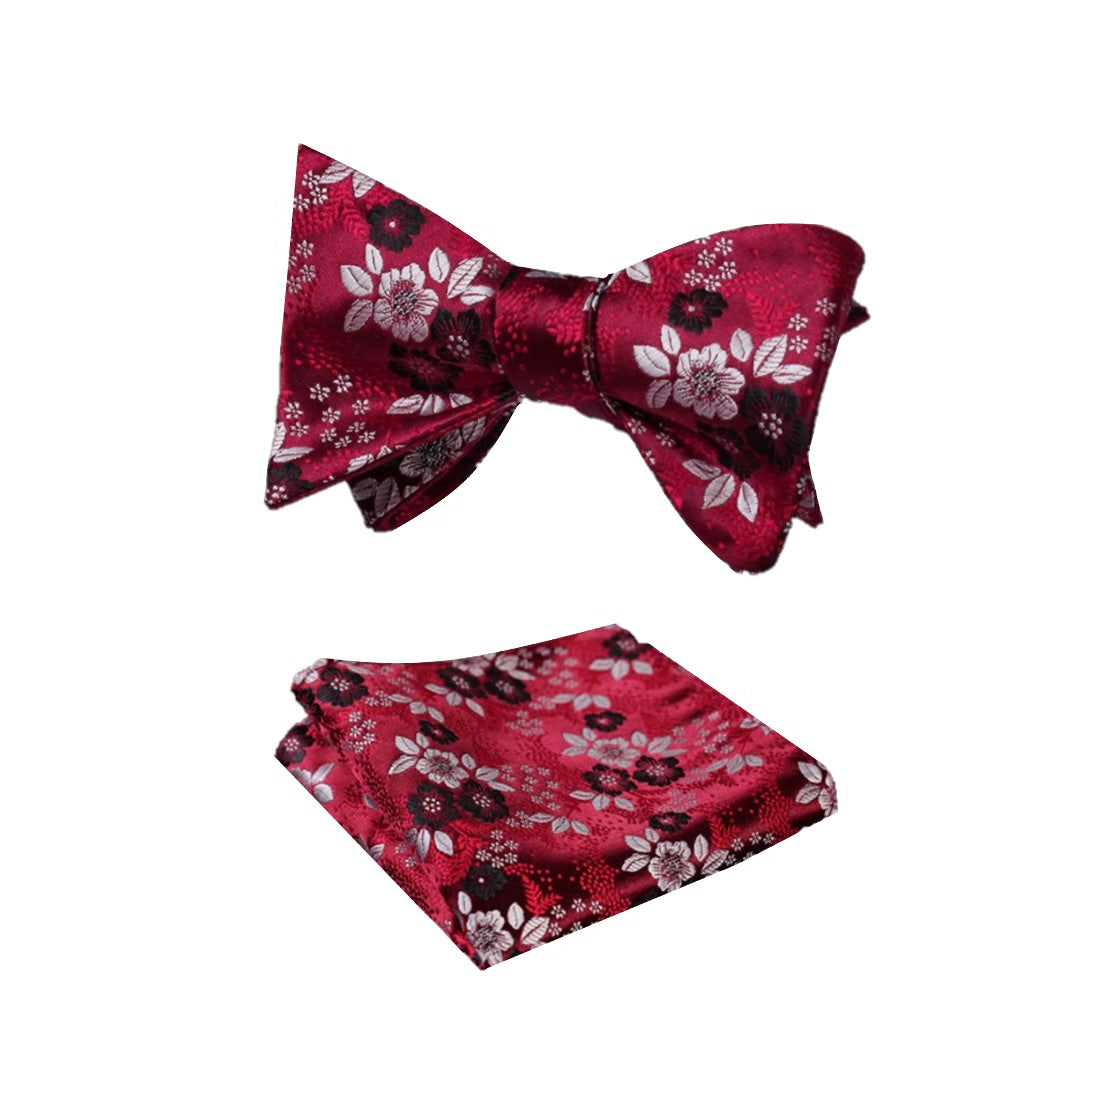  Red, Black, White Detailed Flowers Pattern Silk Self Tie Bow Tie, Matching Pocket Square